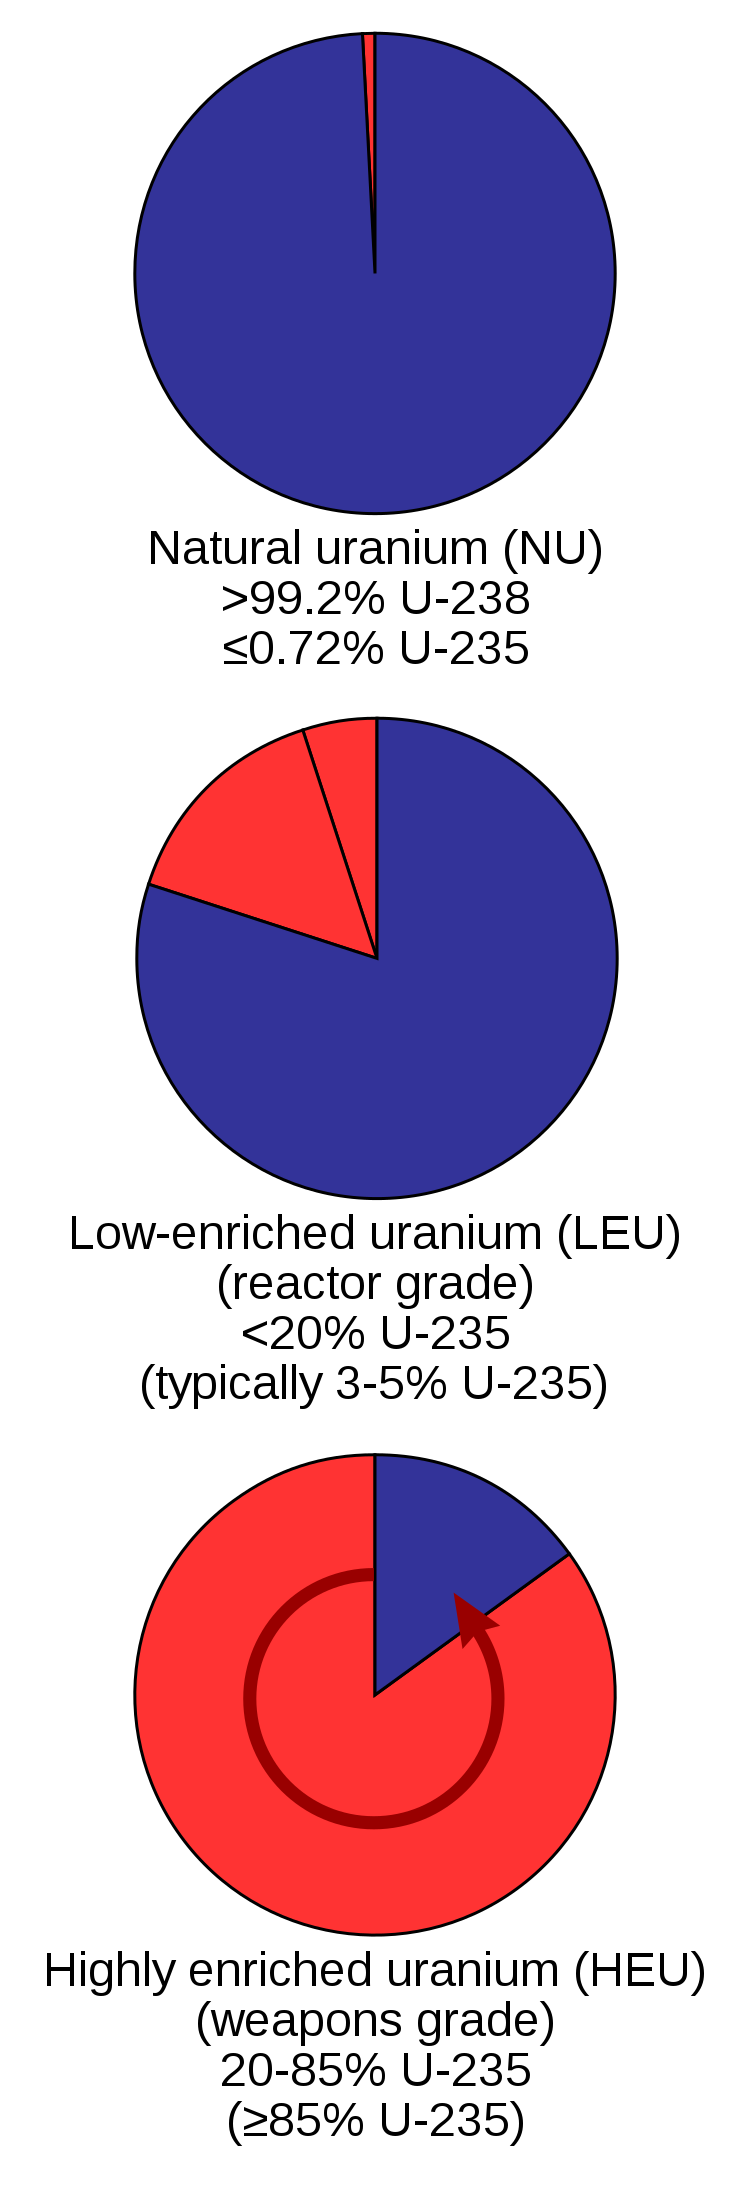 Three pie charts showing uranium enrichment proportions in nature (<0.72%), for fuel (<20%), and for weapons (20-85%).